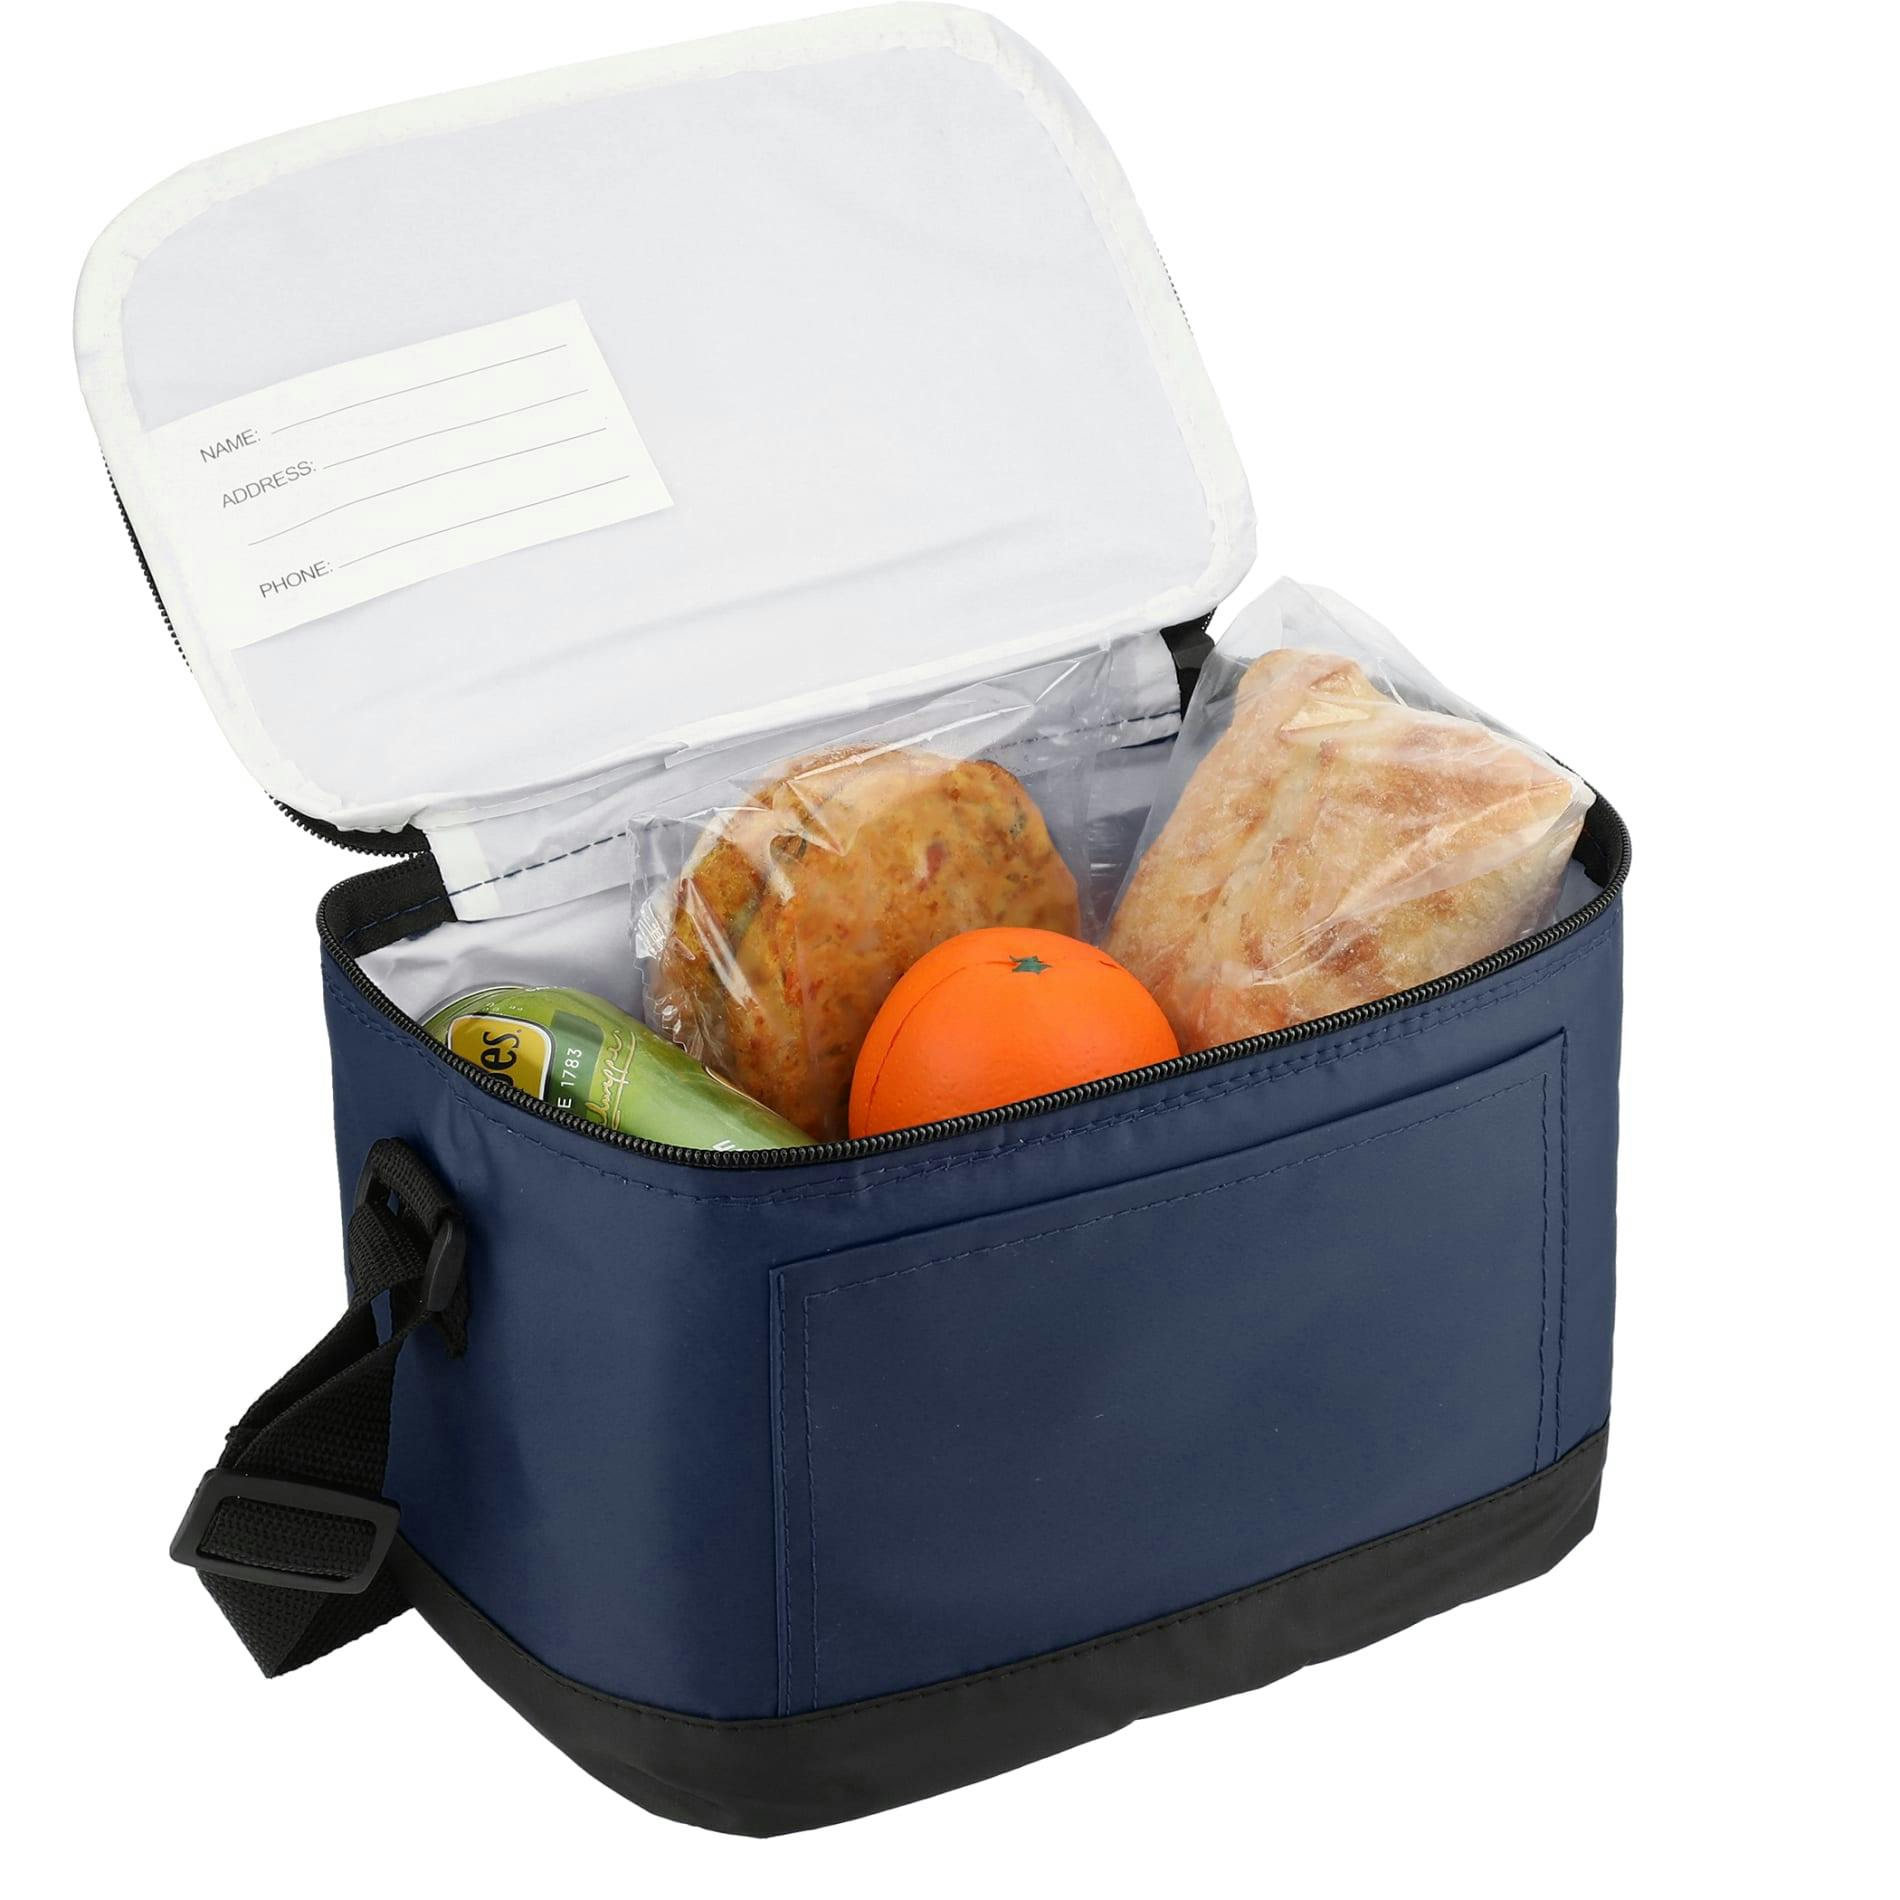 Classic 6-Can Lunch Cooler - additional Image 3